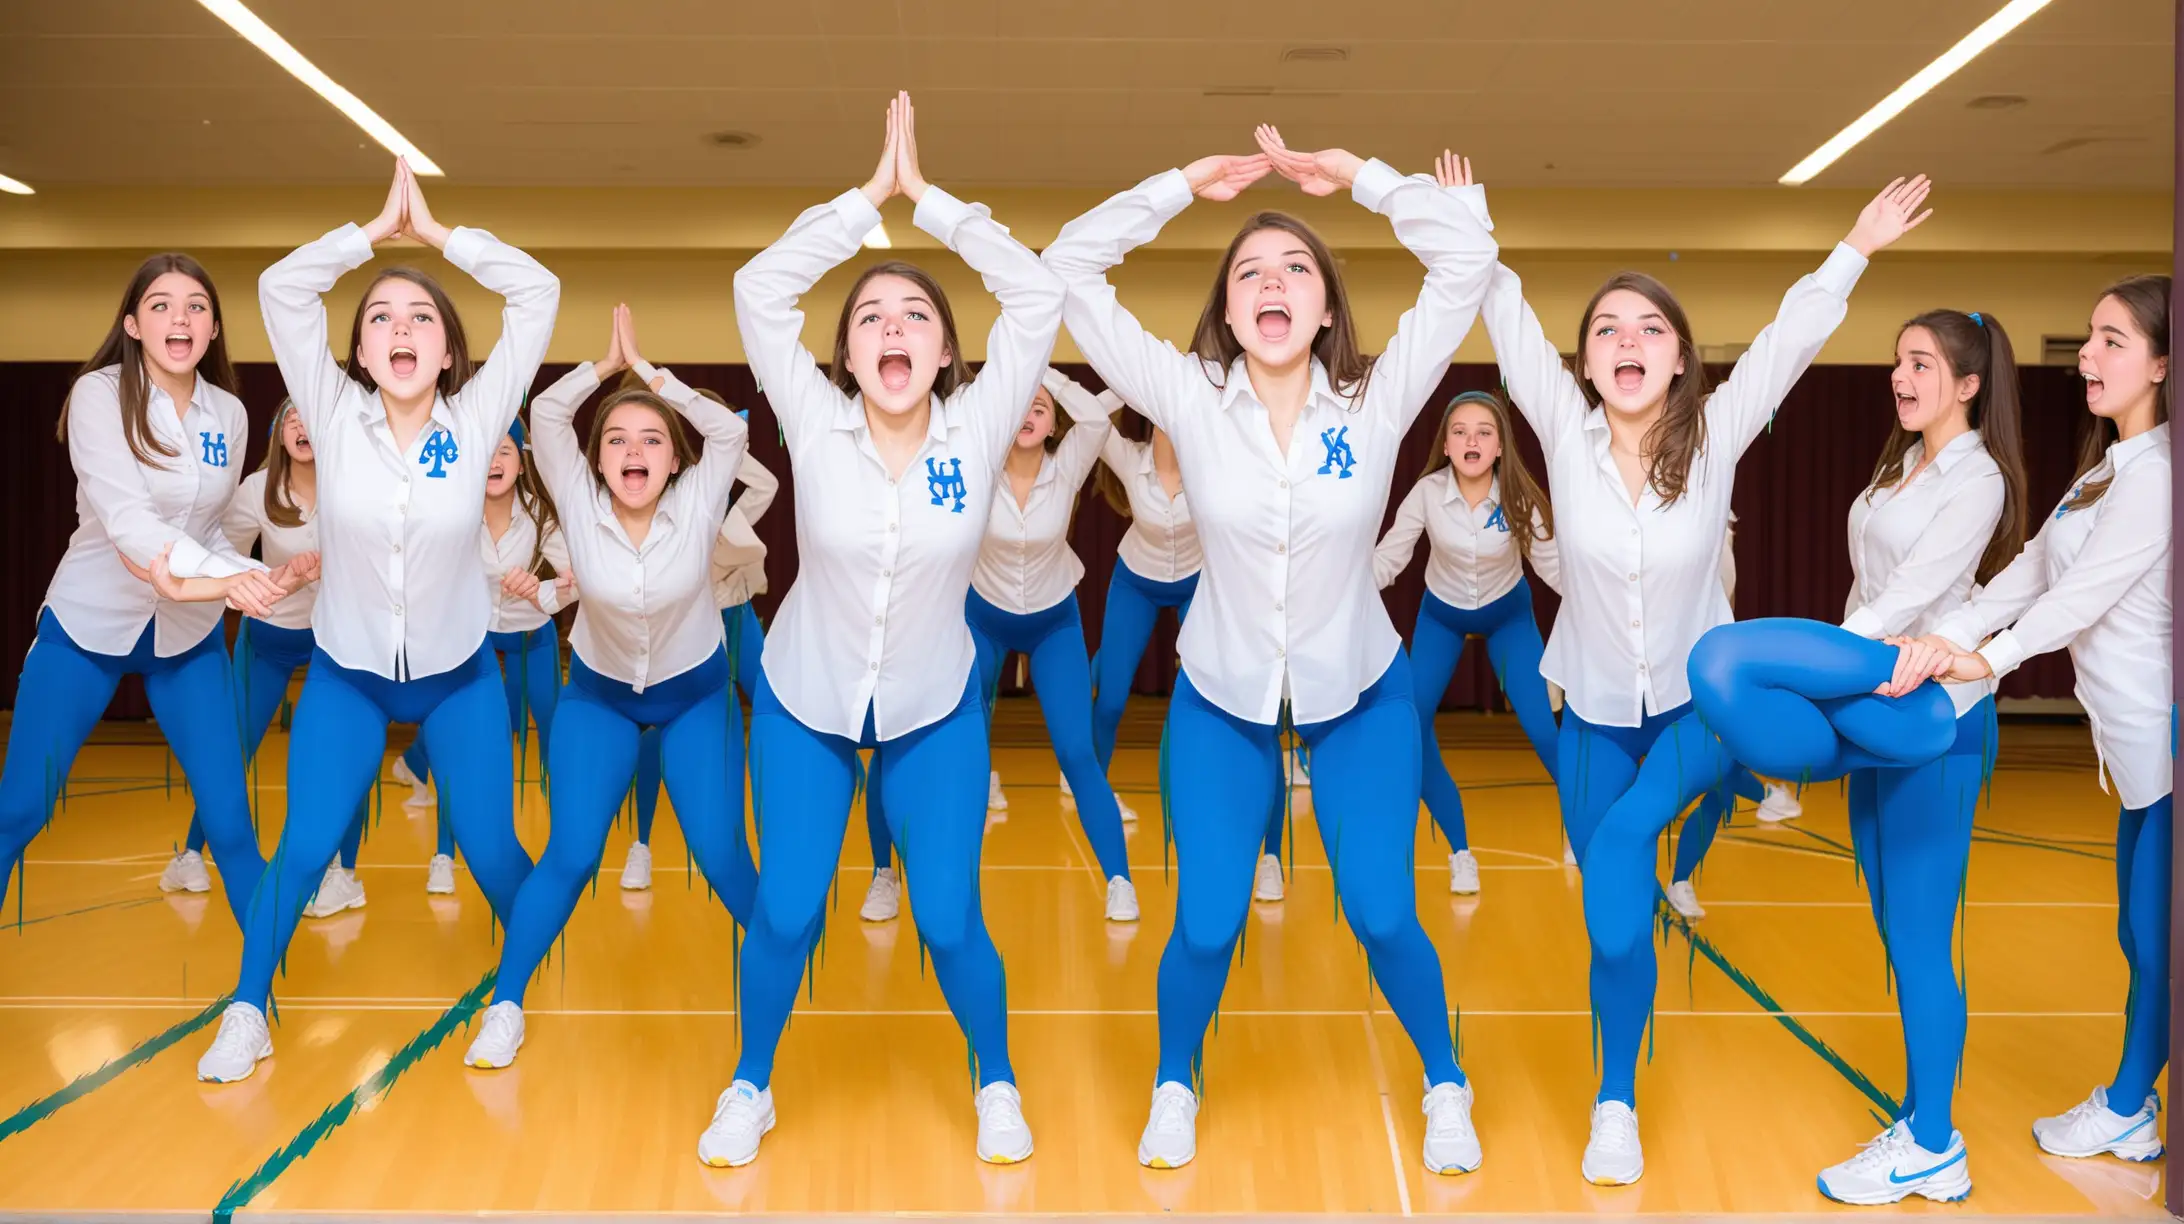 College Age Women, Sorority Hazing, all wearing white stretch button down shirts, blue tights, perform Overhead squats as part of their hazing ritual.